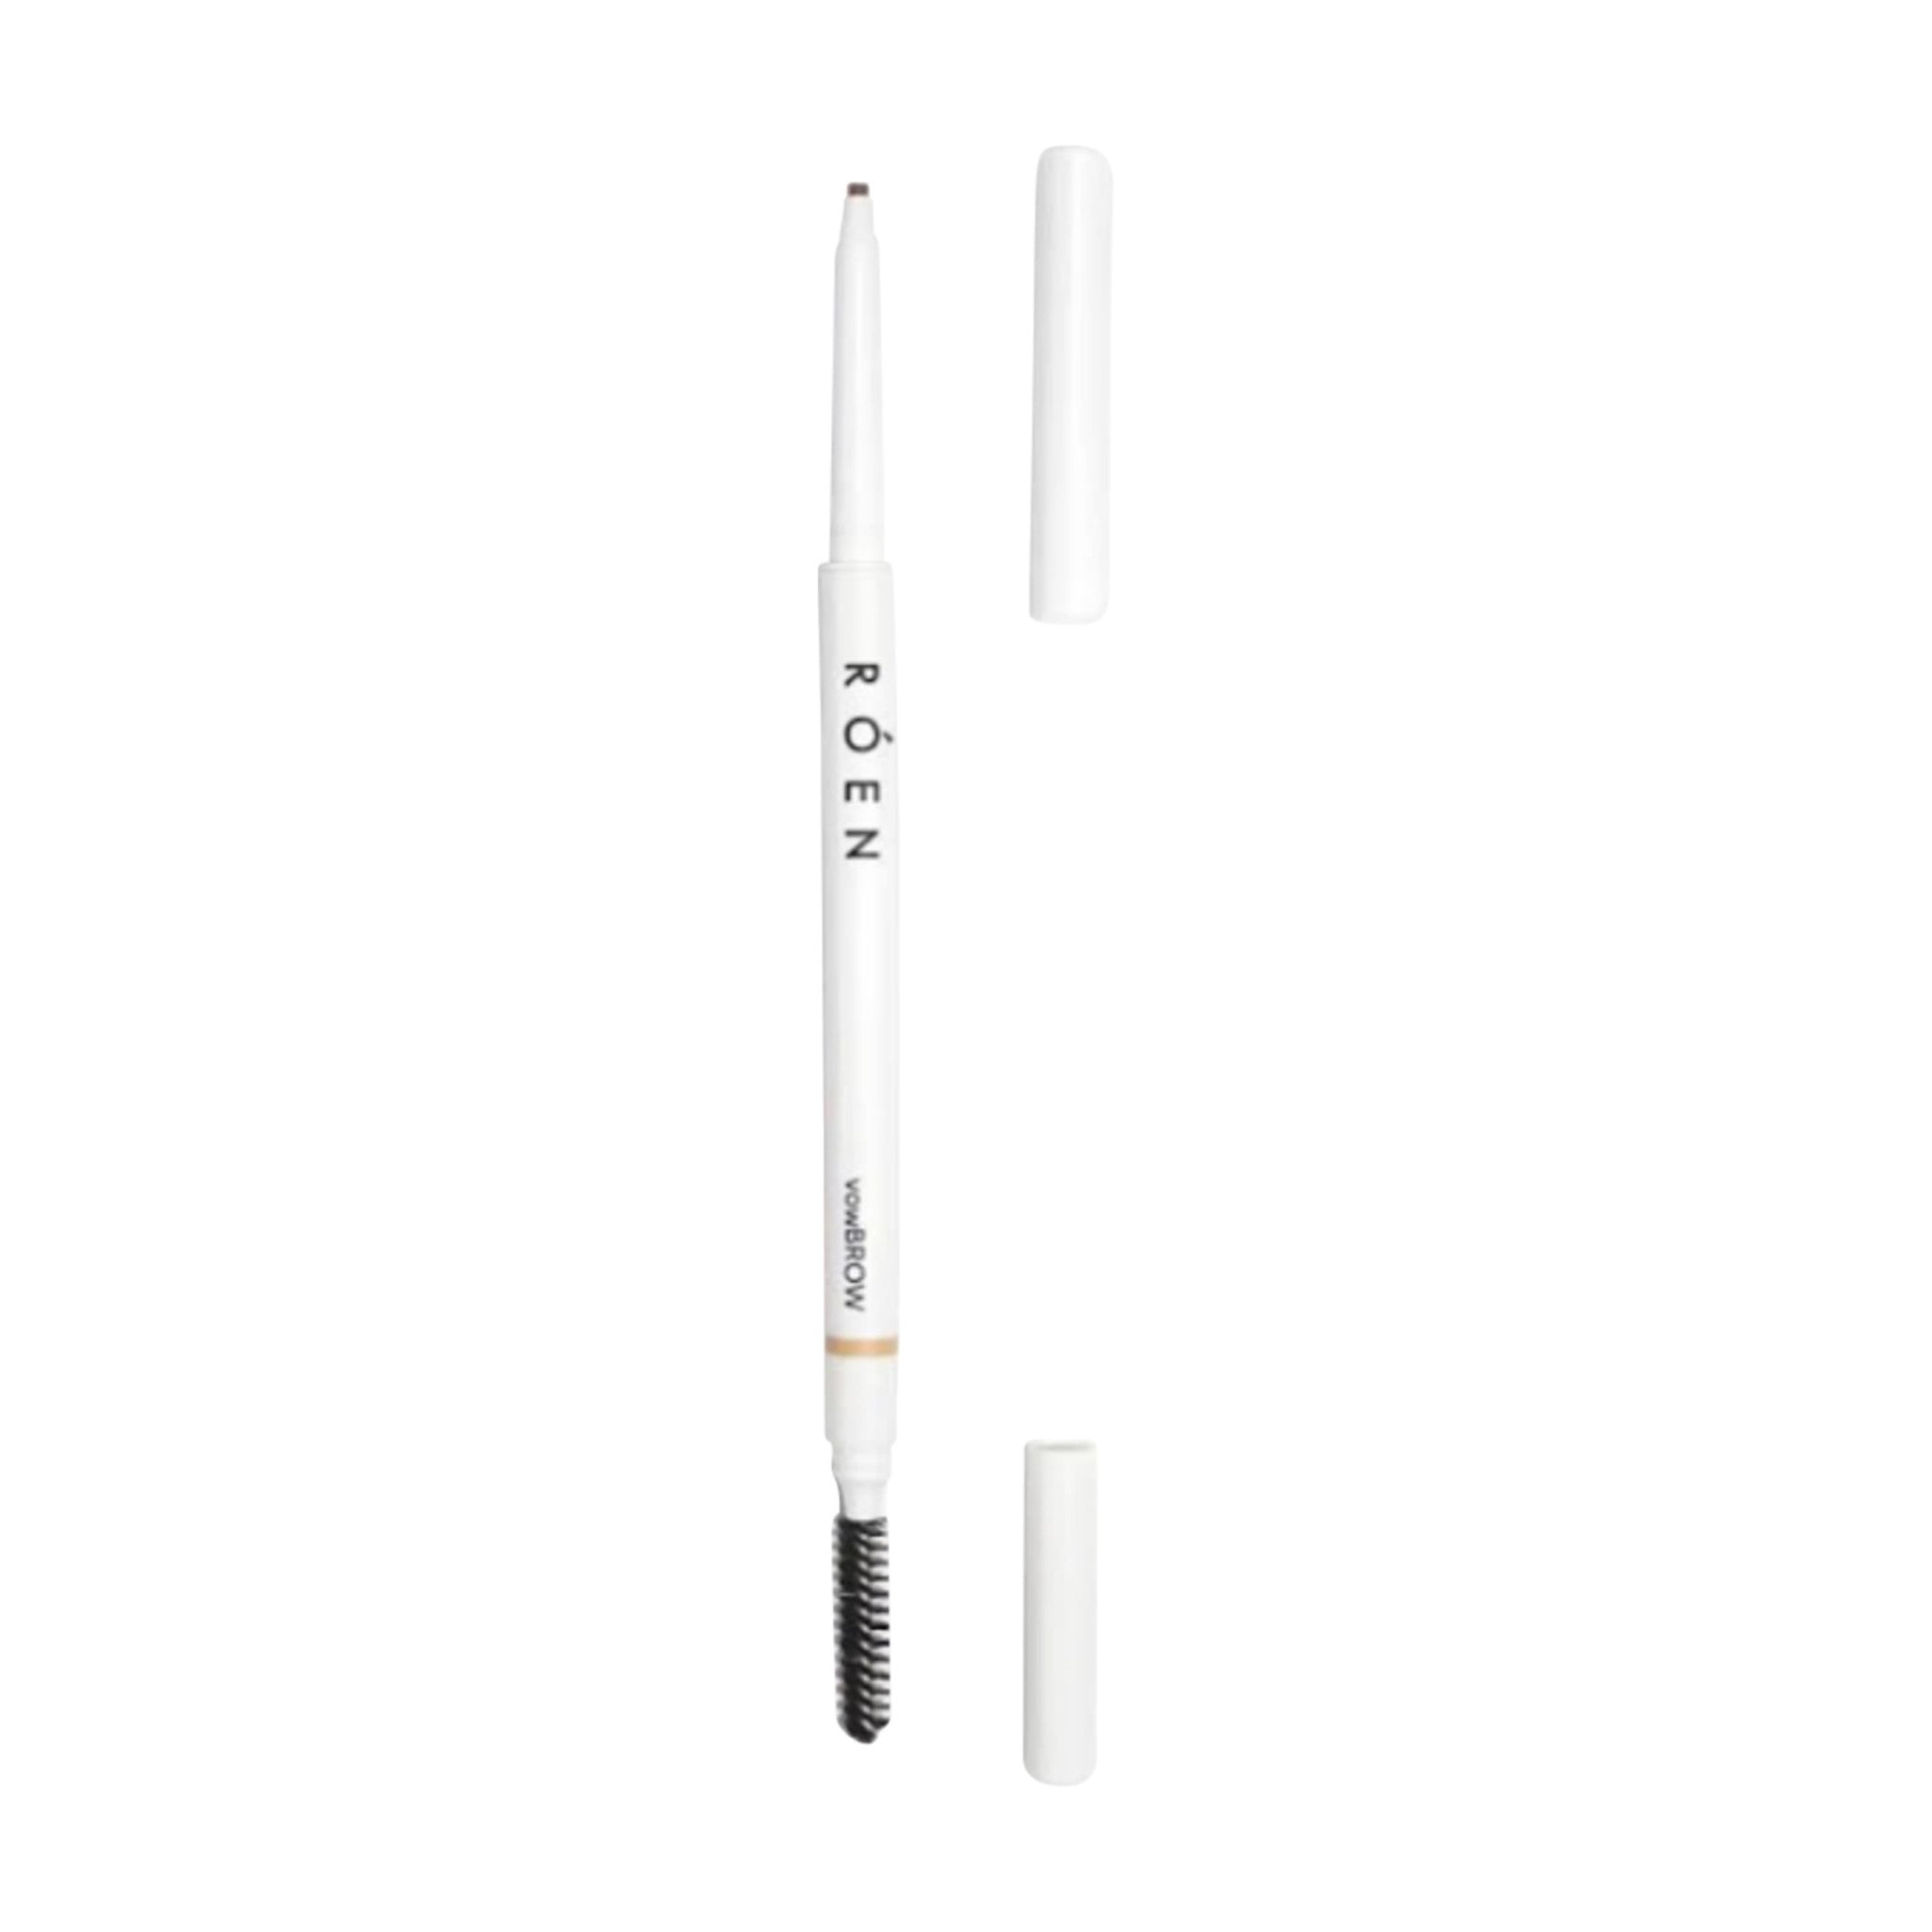 Róen VowBrow Pencil Color/Shade variant: Light Brown main image. This product is in the color brown